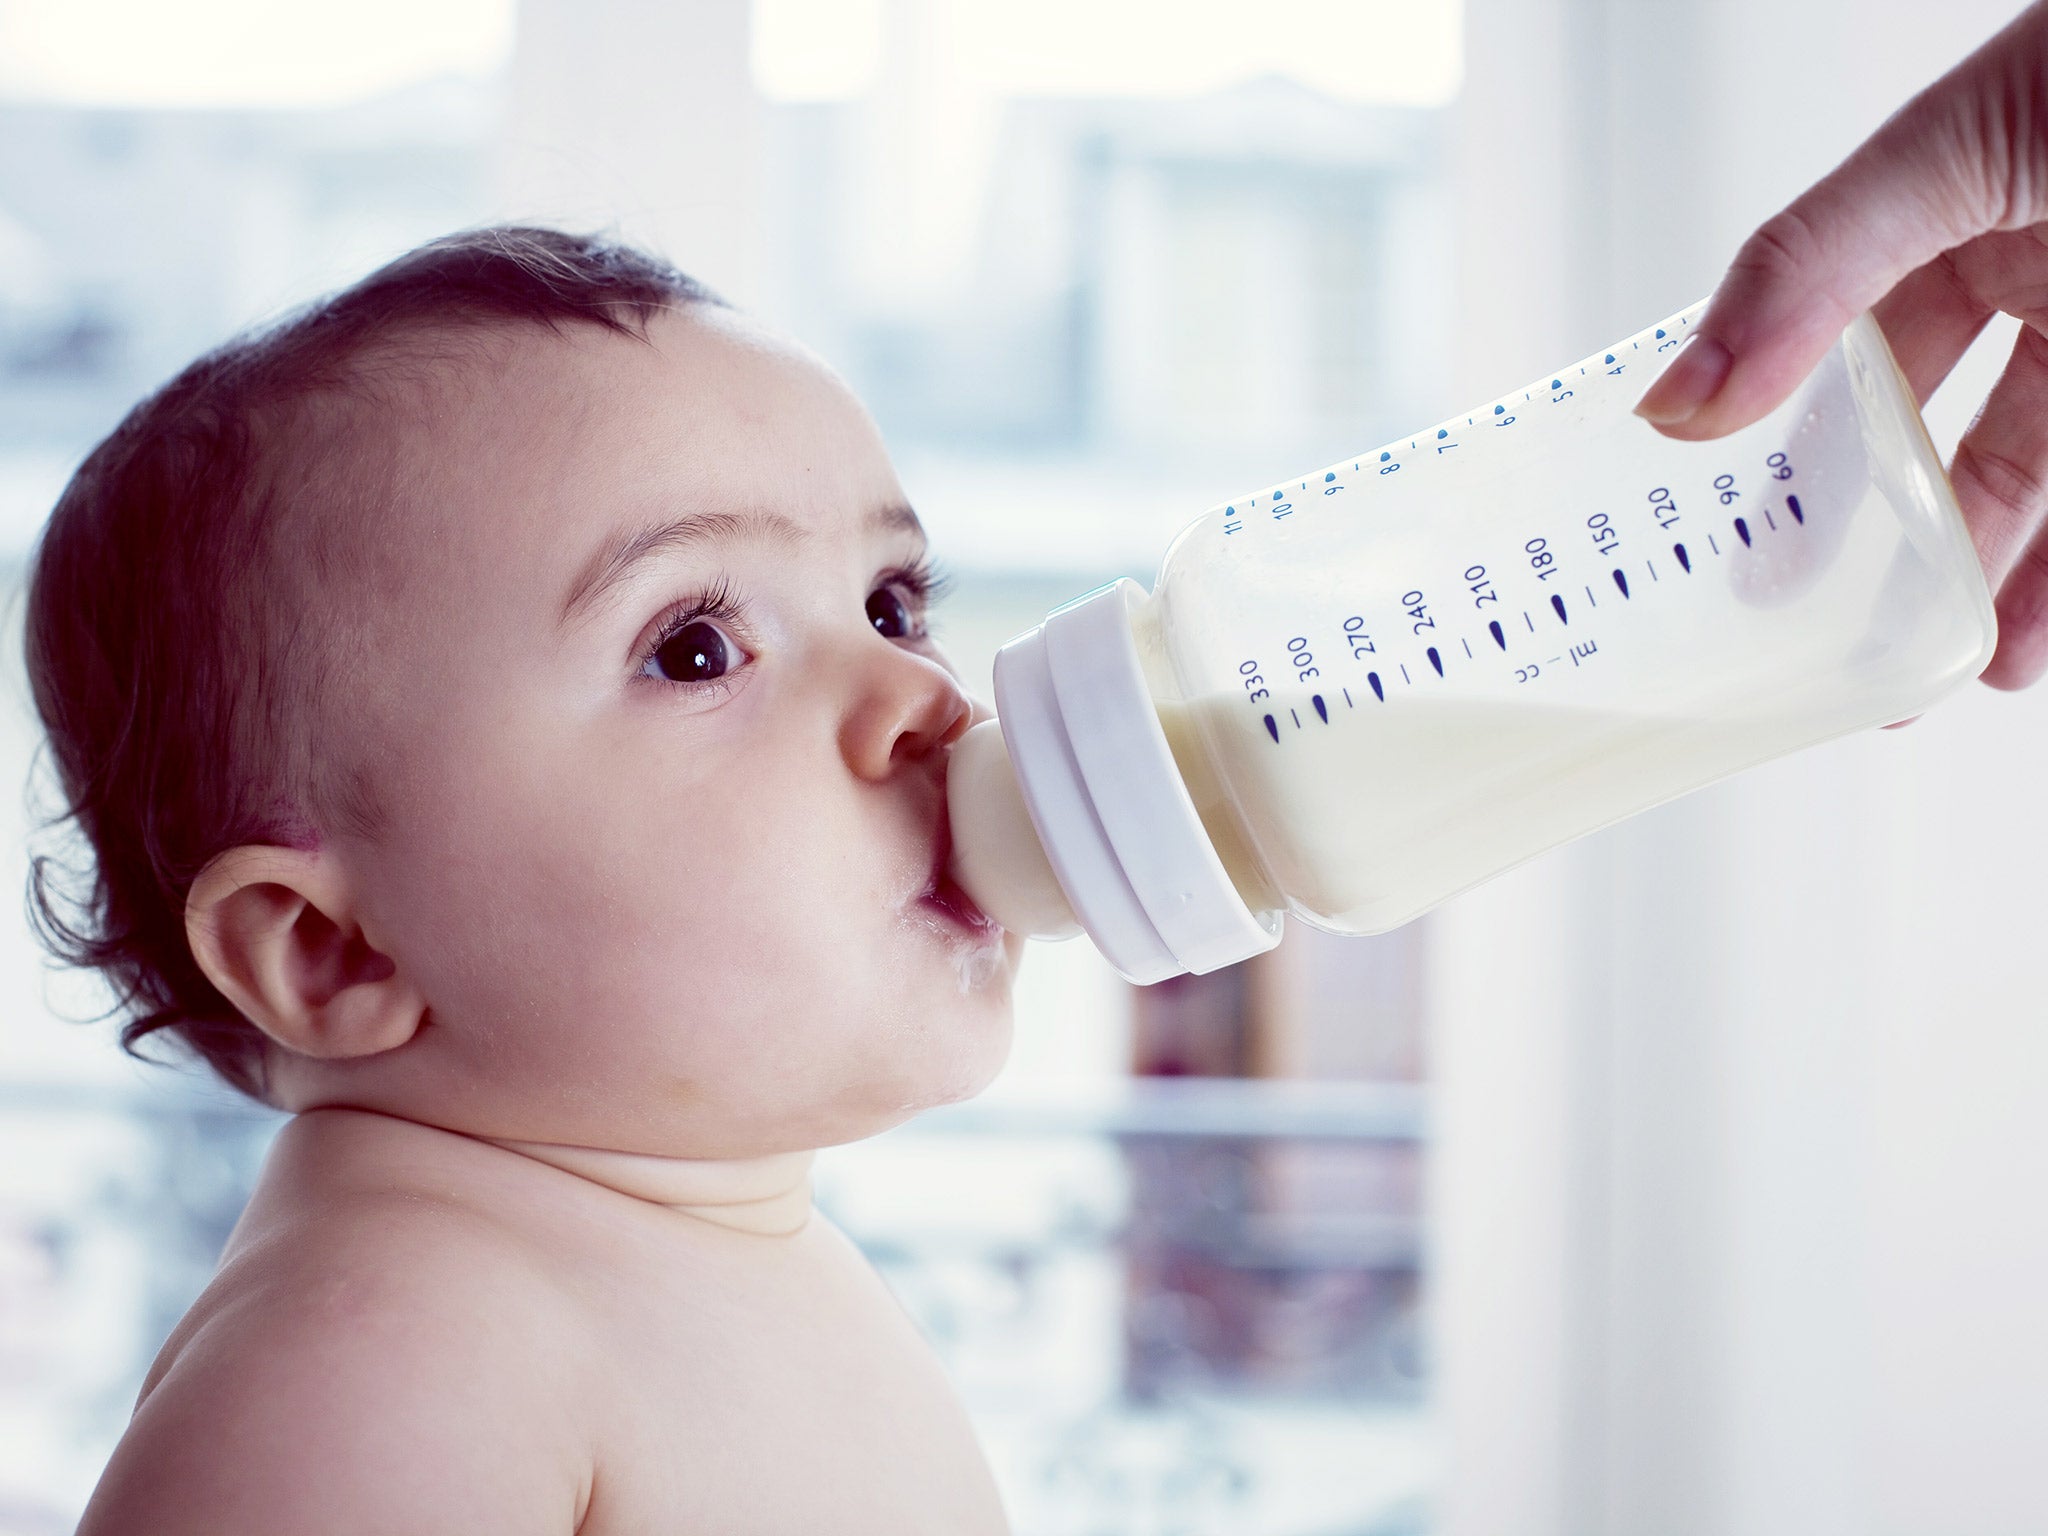 Thousands of babies are being diagnosed with cow’s milk allergy when they are only showing ‘normal’ infanthood ailments